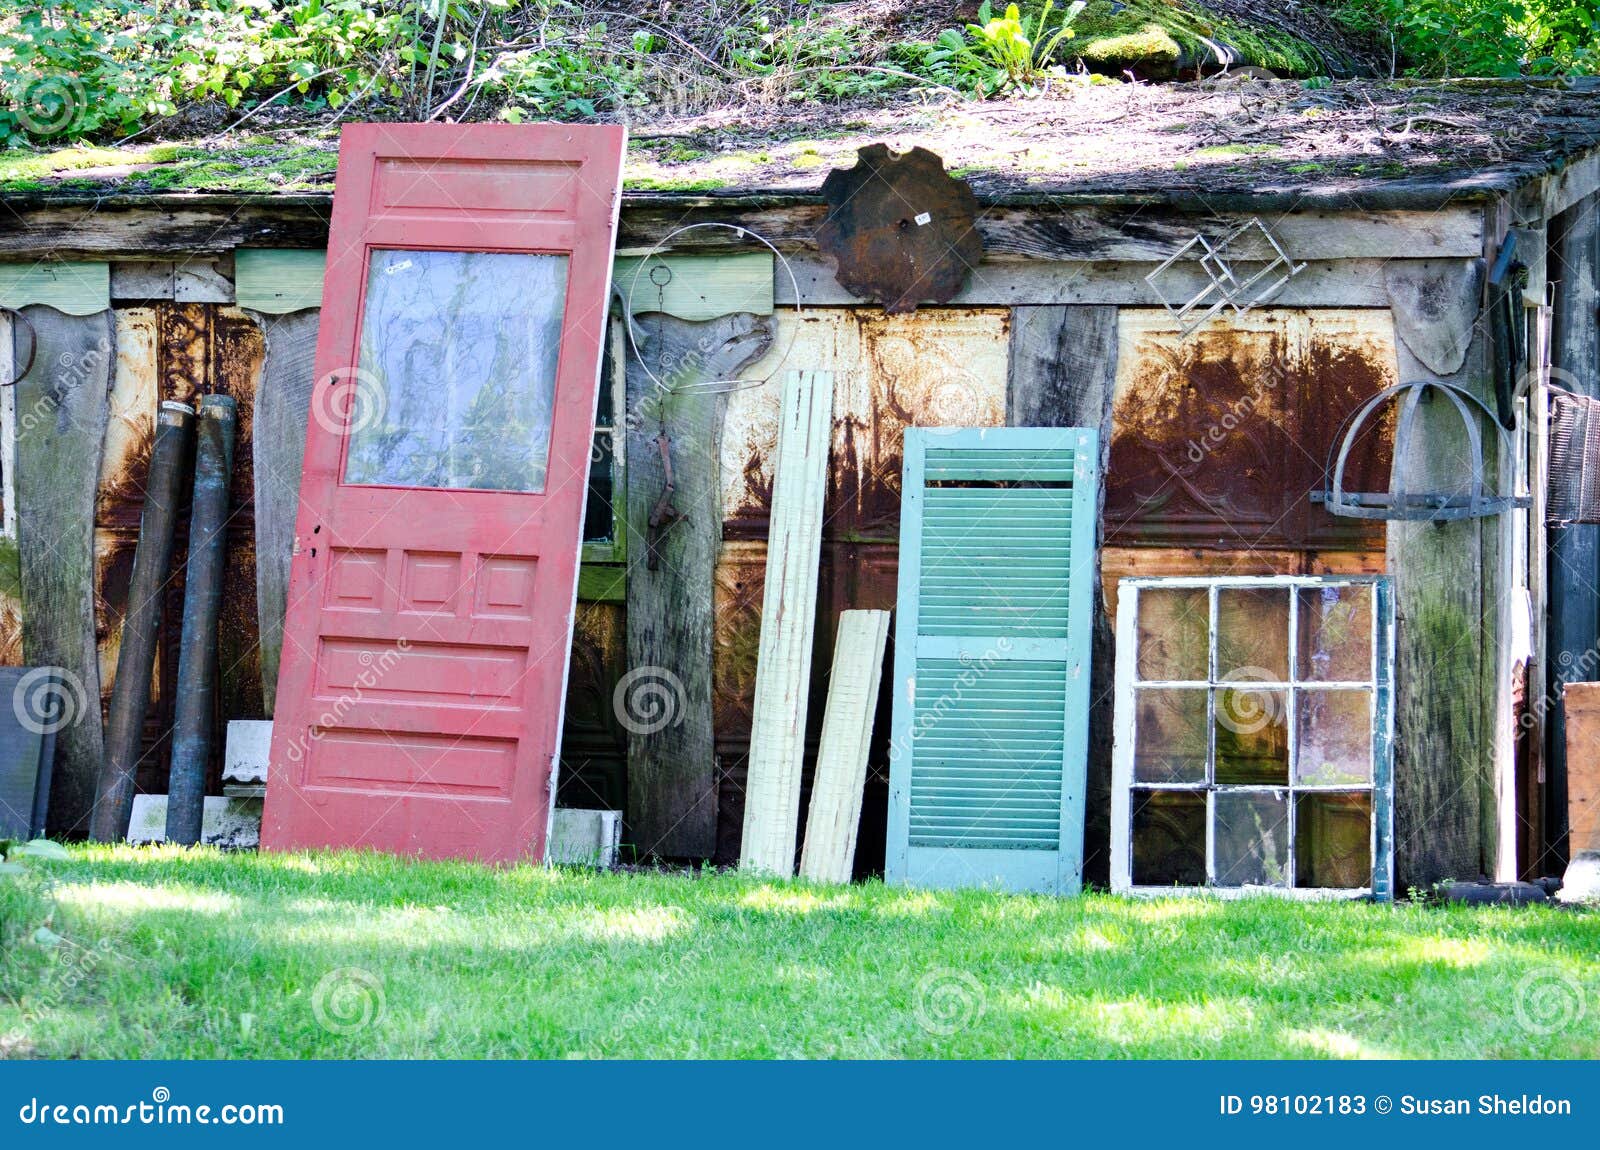 Salvage Yard with Old Doors and Windows Stock Image - Image of glass, money: 98102183